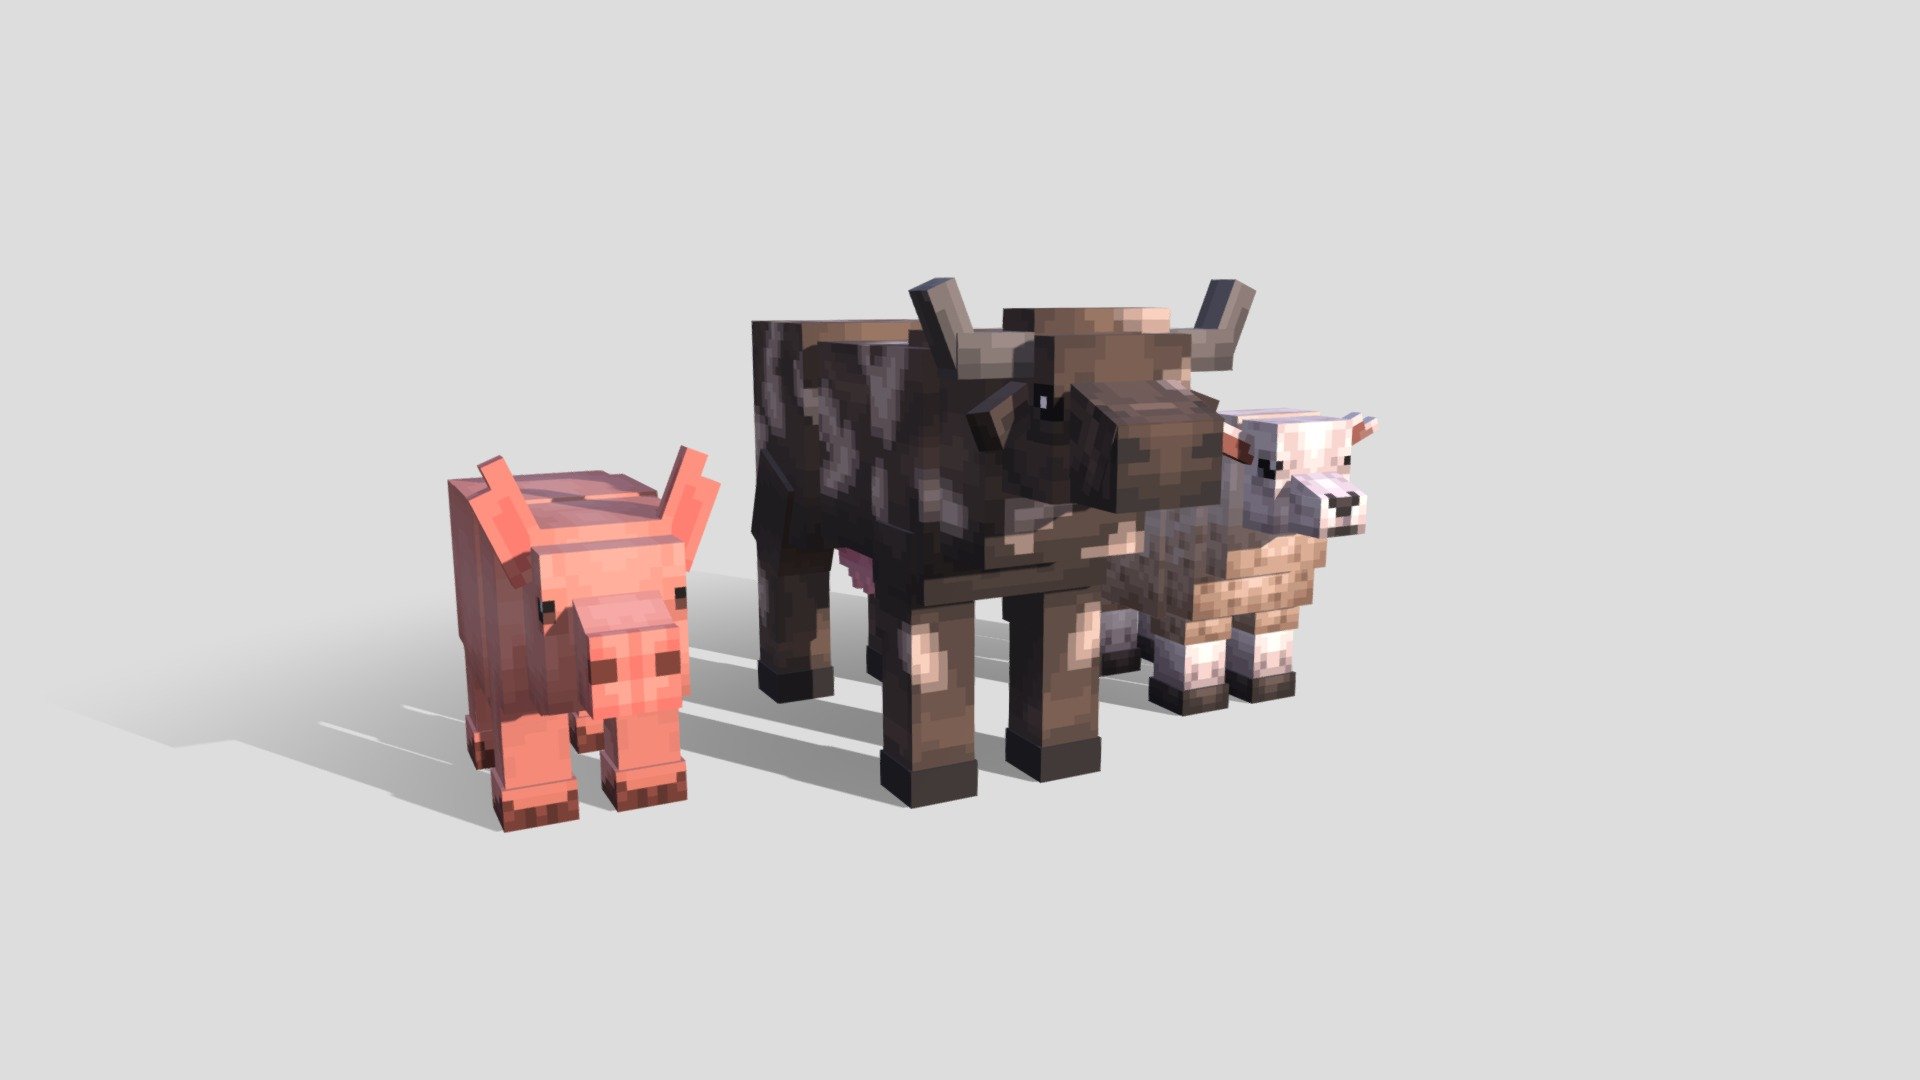 Farm Animals 32x textures Minecraft models
.#BlockBench #LowPoly #PixelArt

Want to have a custom model? Contact: wasteland4013 (Discord)|Comms Open - Farm Animals 32x textures Minecraft models - 3D model by W'Projects (@wprojects) 3d model